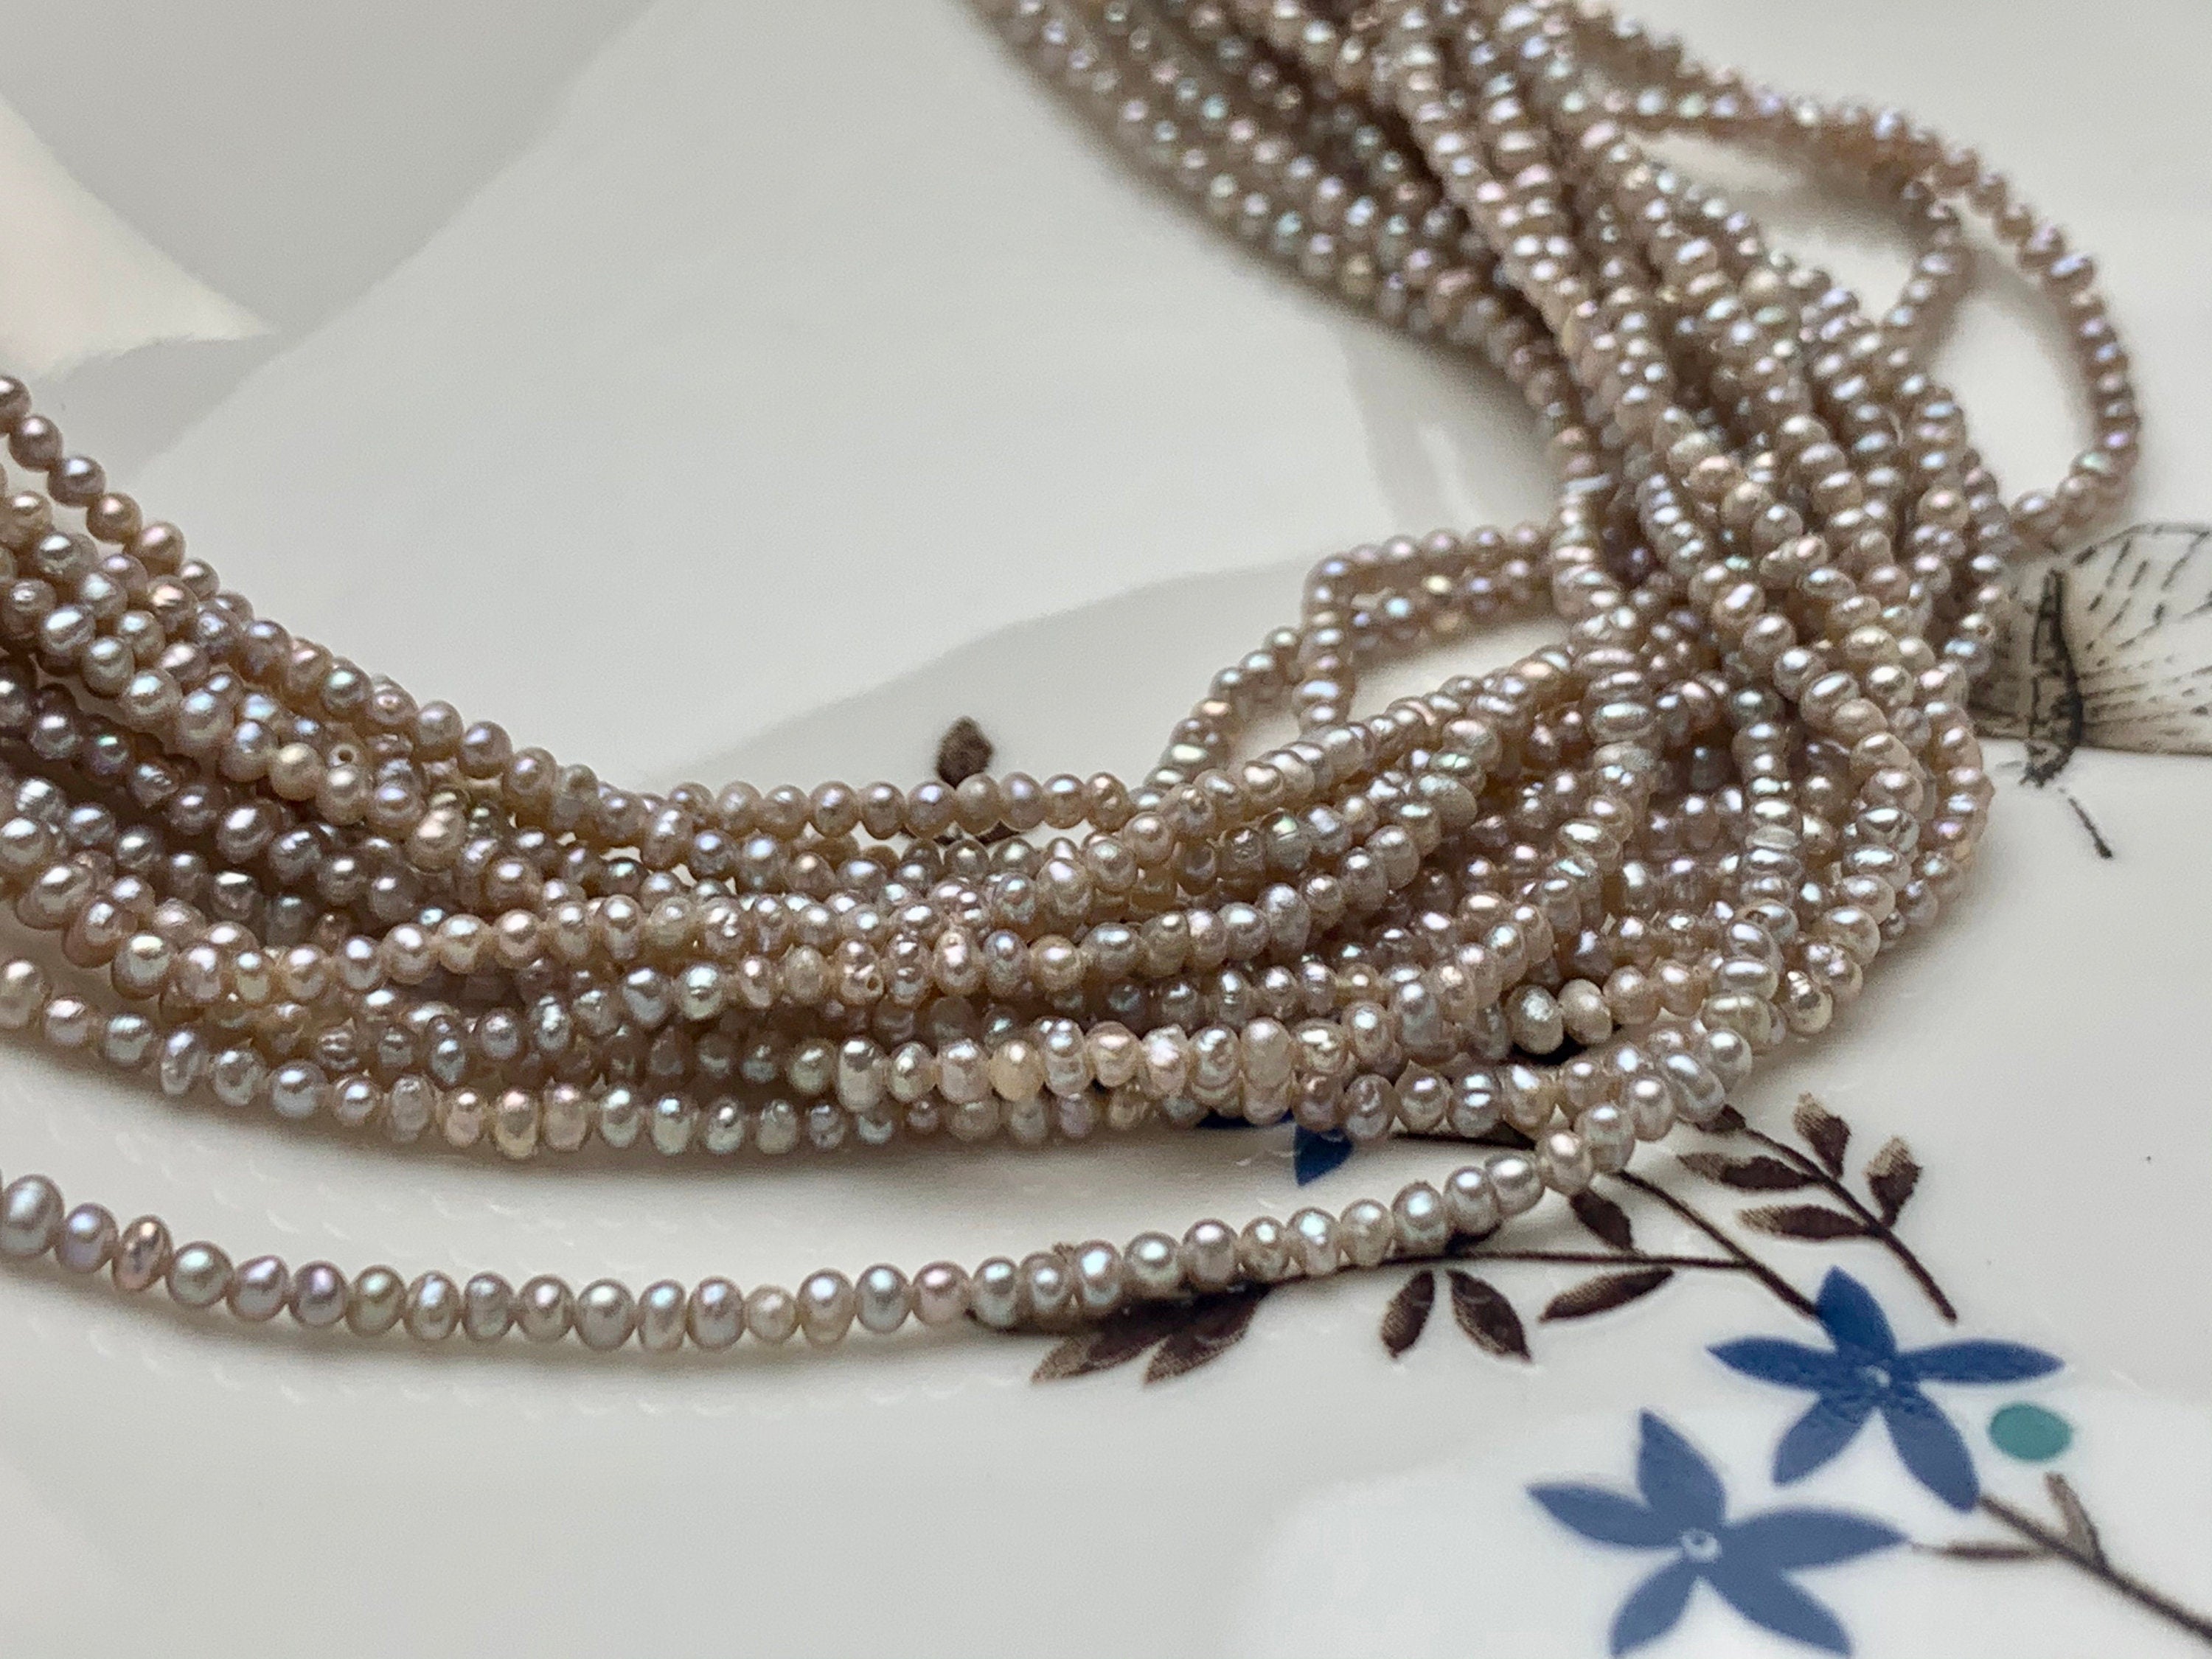 WHOLESALE 2 Mm Tiny Seed Pearl Beads Natural White Pink or Gray Color  Potato Freshwater Pearls Genuine Freshwater Pearl Seed Pearls 821 